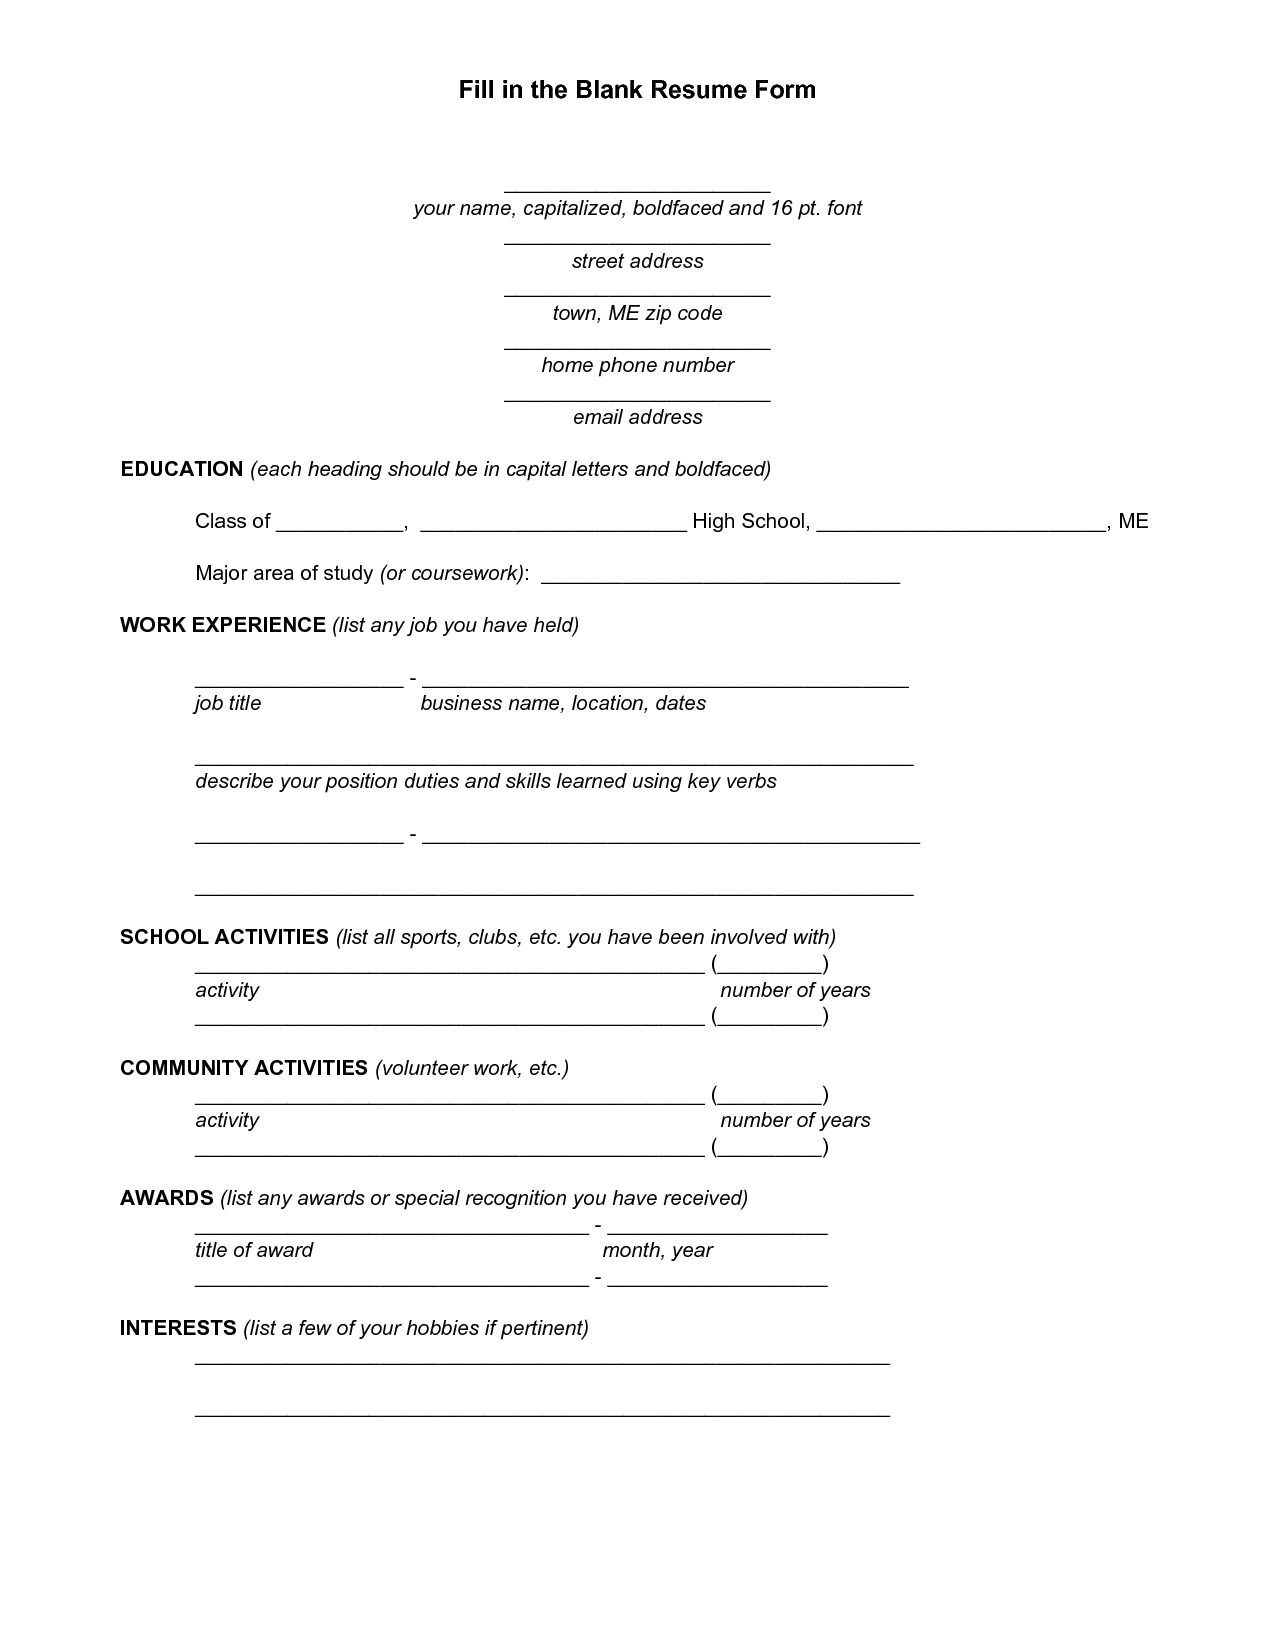 Resume Templates You Can Fill In resume ResumeTemplates templates 